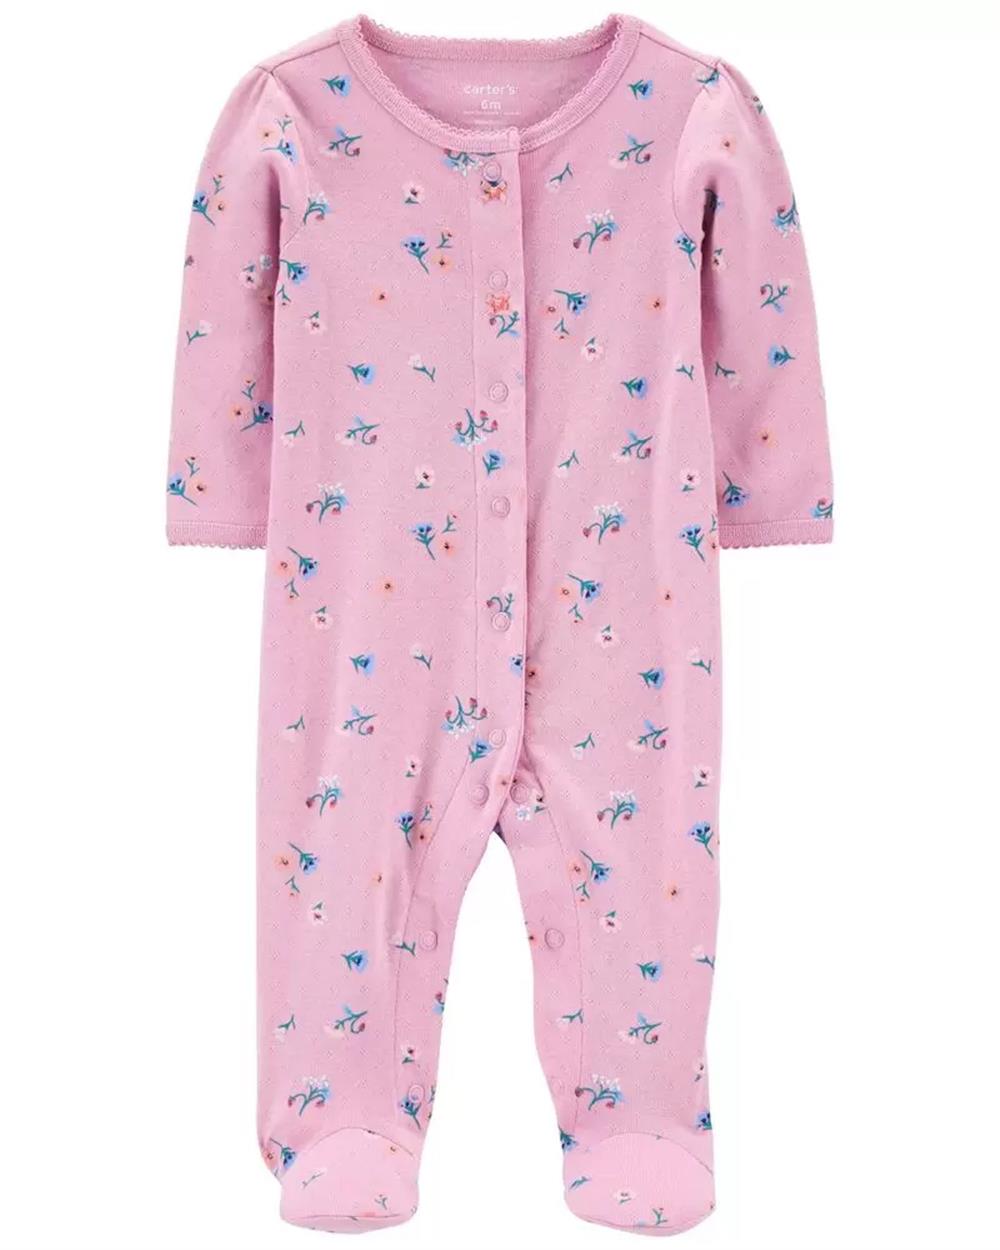 Carters Girls 0-9 Months Floral Snap-Up Cotton Sleep & Play